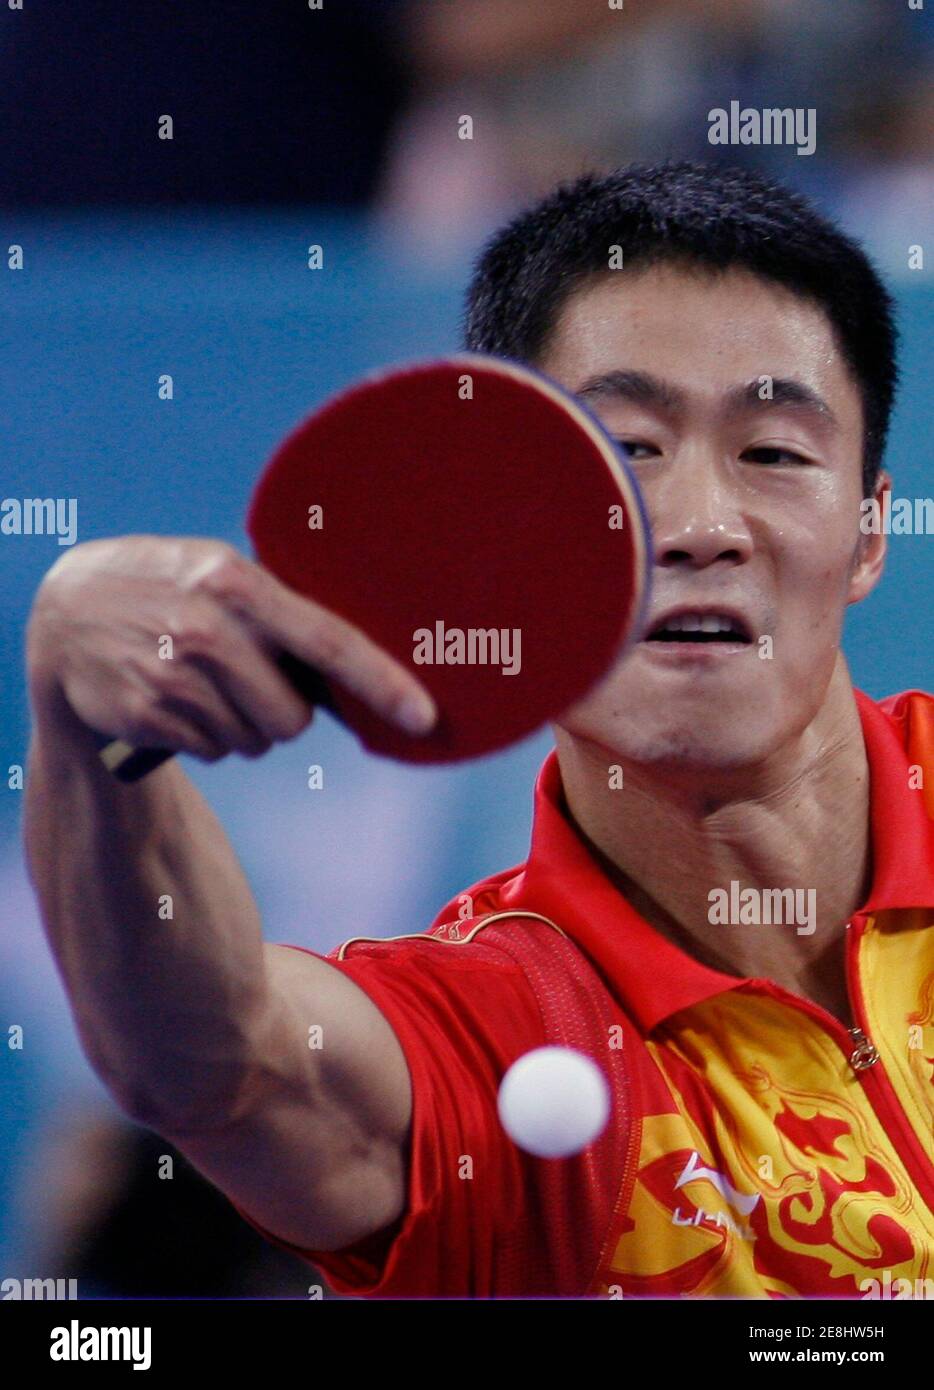 Wang Liqin of China plays a shot during his men's singles quarterfinals table tennis match against Tan Ruiwu of Croatia at the Beijing 2008 Olympic Games, August 22, 2008.    REUTERS/Beawiharta (CHINA) Stock Photo